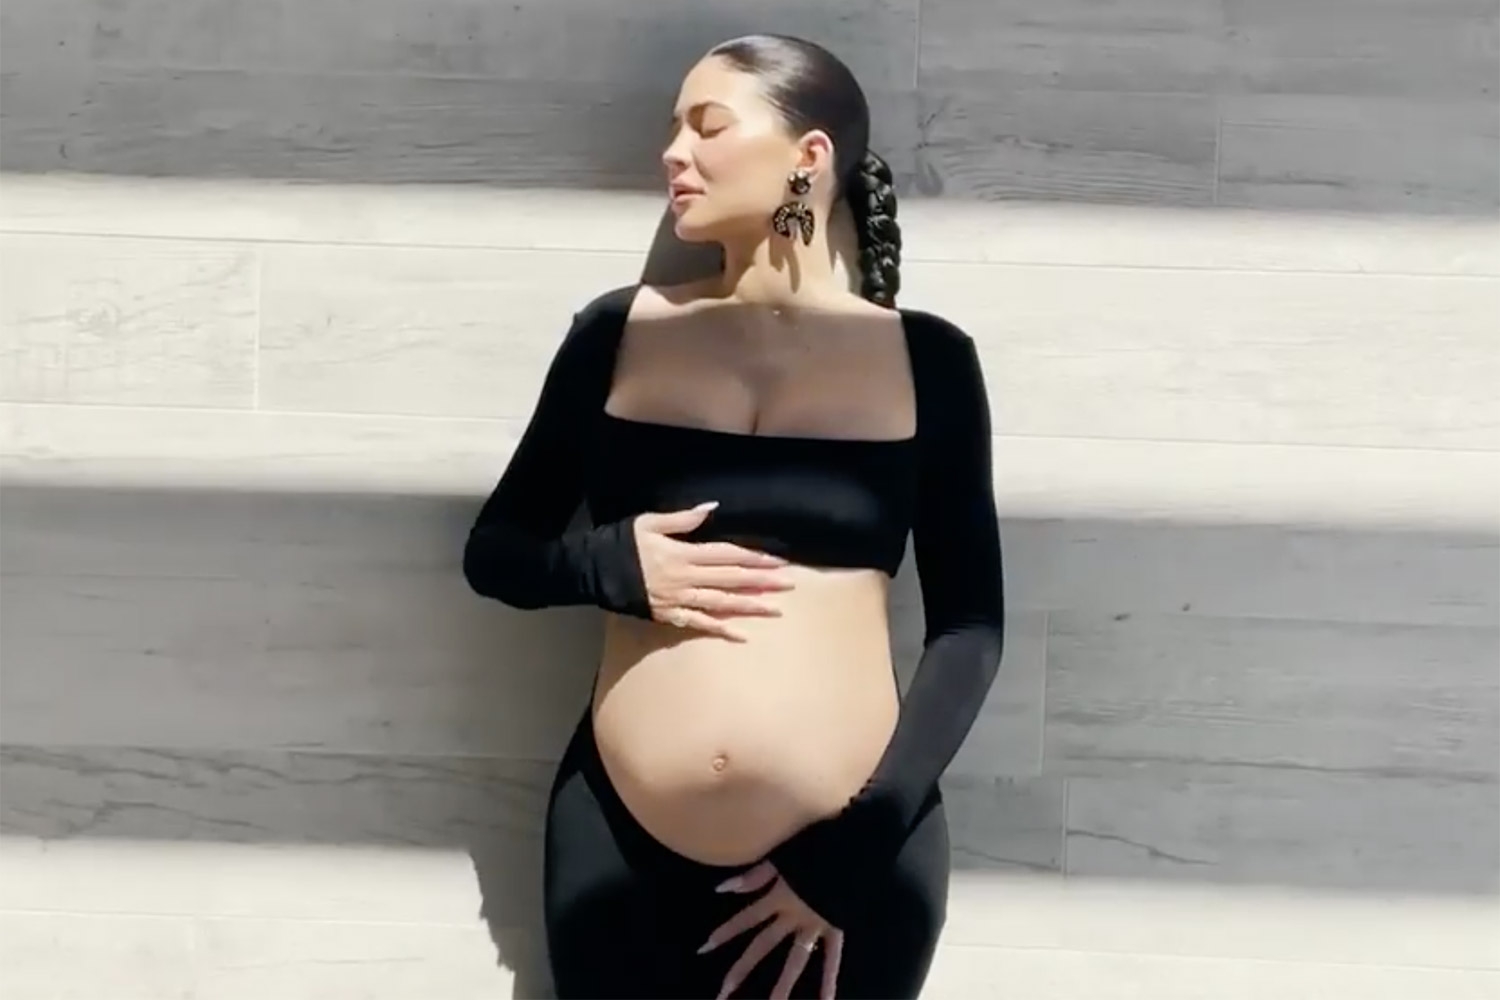 Top 20 Most Beautiful Pregnant Celebrities in The World of All Time